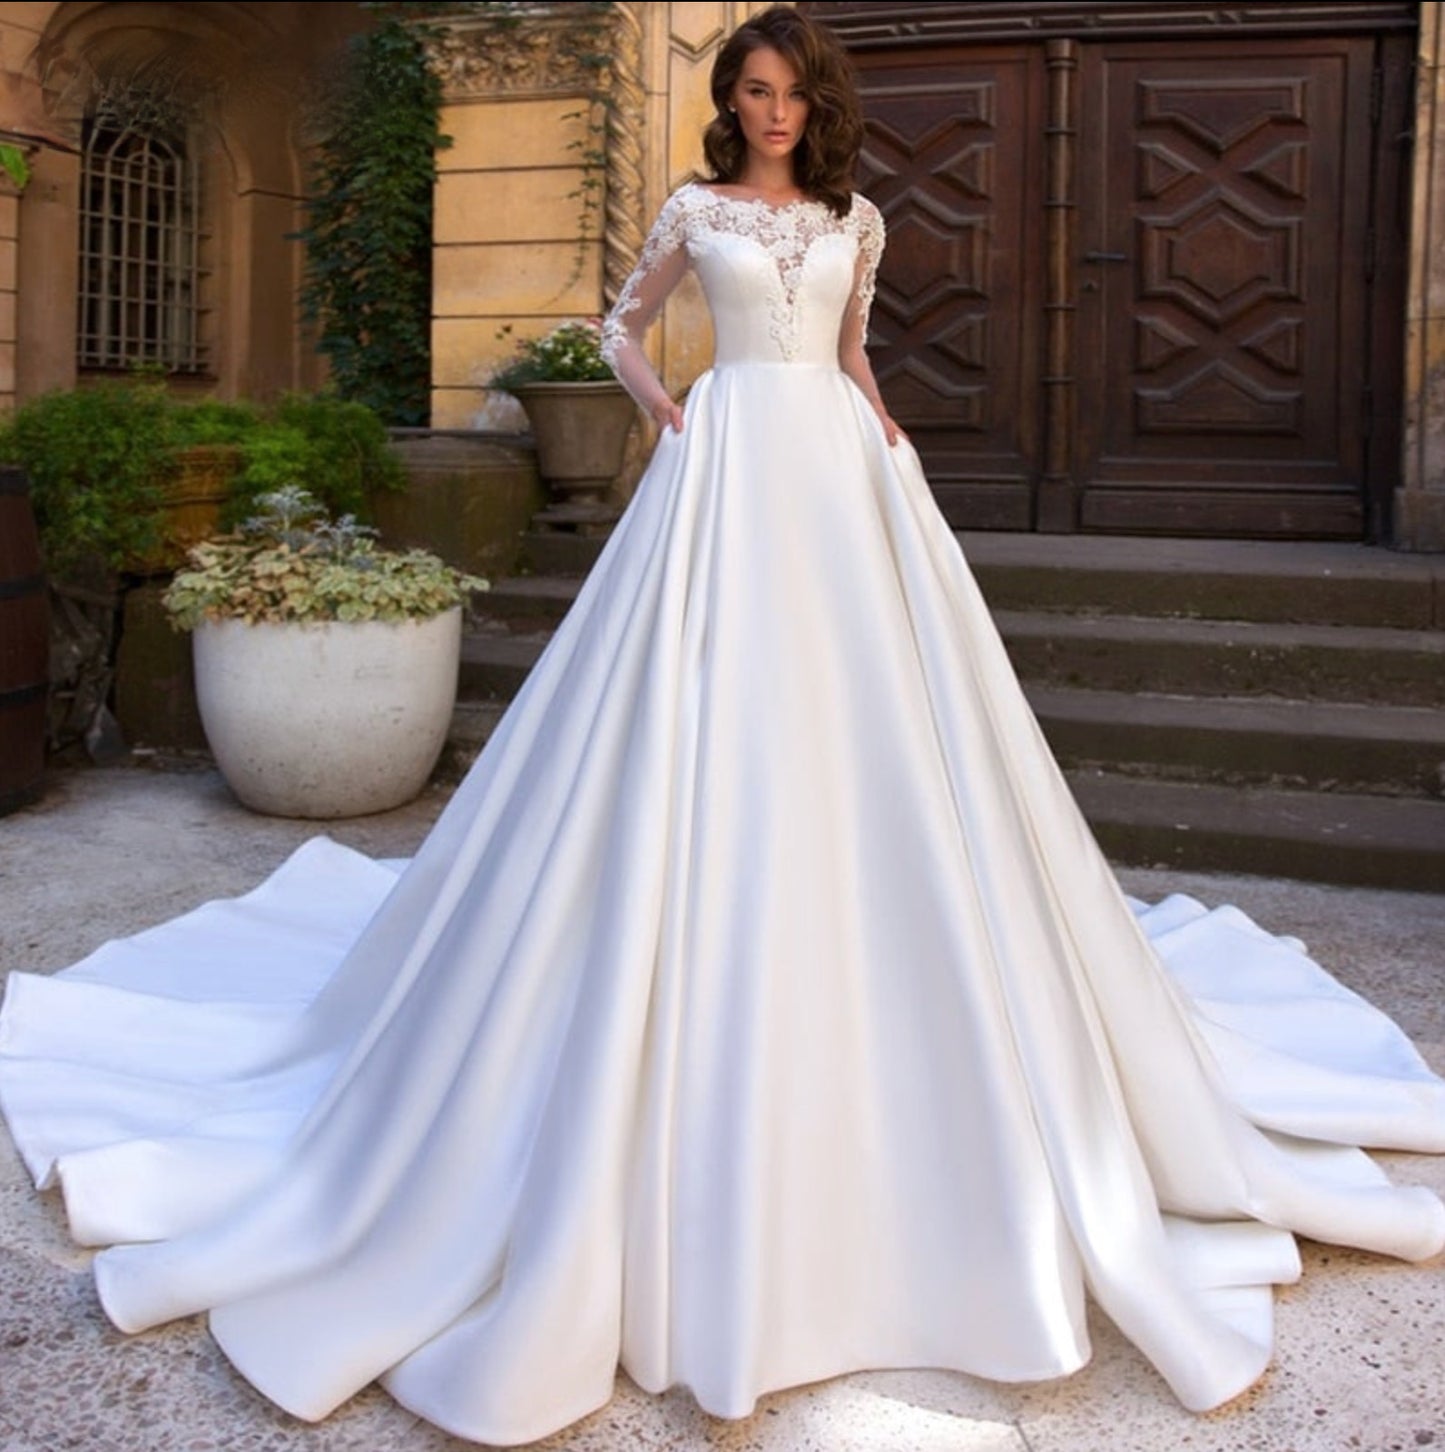 Soft Tulle A-Line Wedding Dress Illusion Neckline And Sheer Back – TulleLux  Bridal Crowns & Accessories